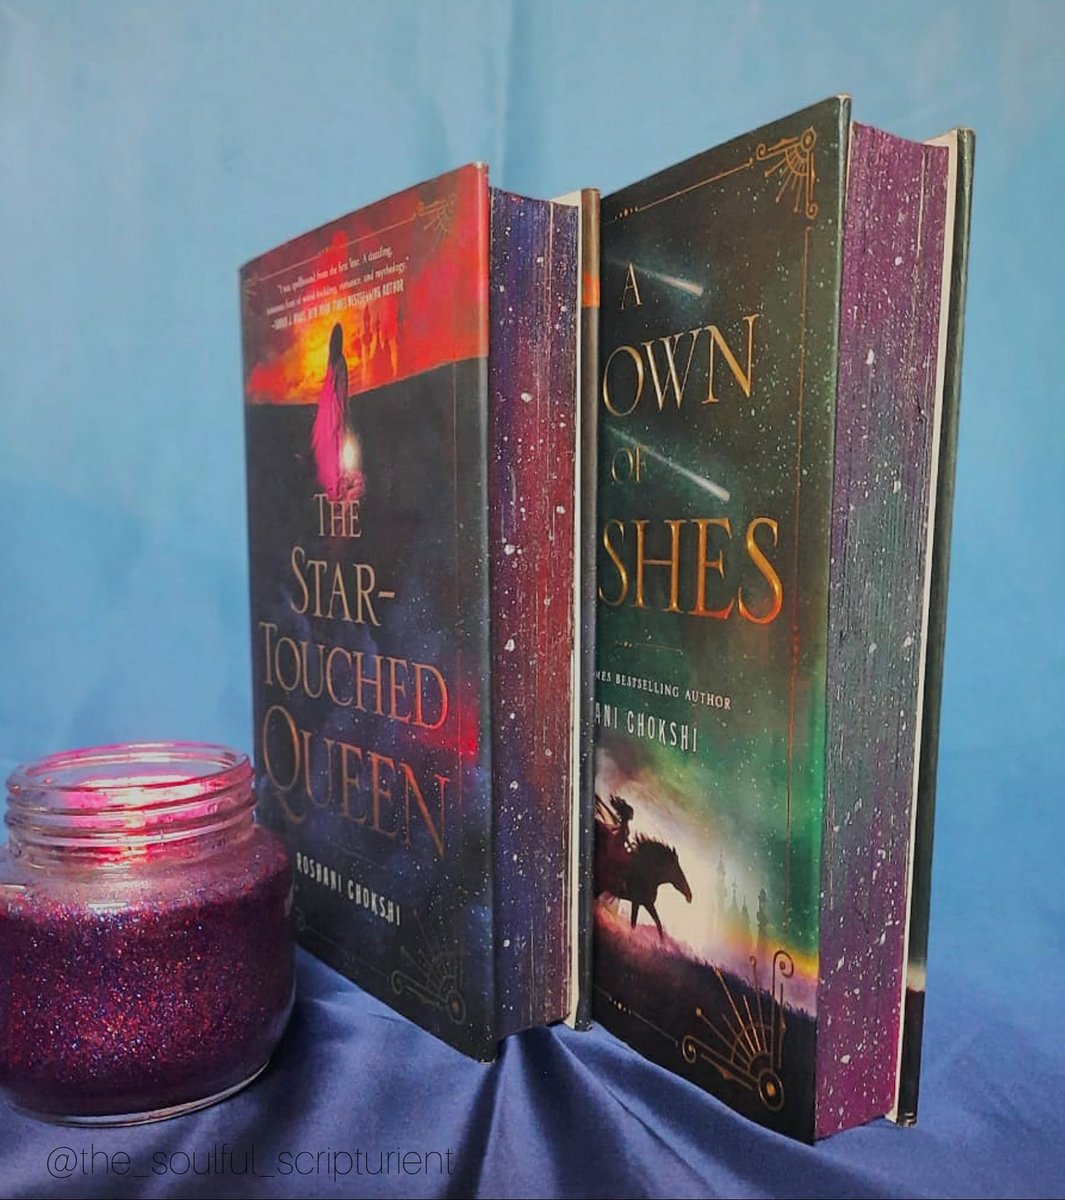 I'm sharing it here too because I am really happy with how this turned out!!!💫💫💫

#sprayededgebooks #startouchedqueen #crownofwishes #roshanichokshi #BookTwitter